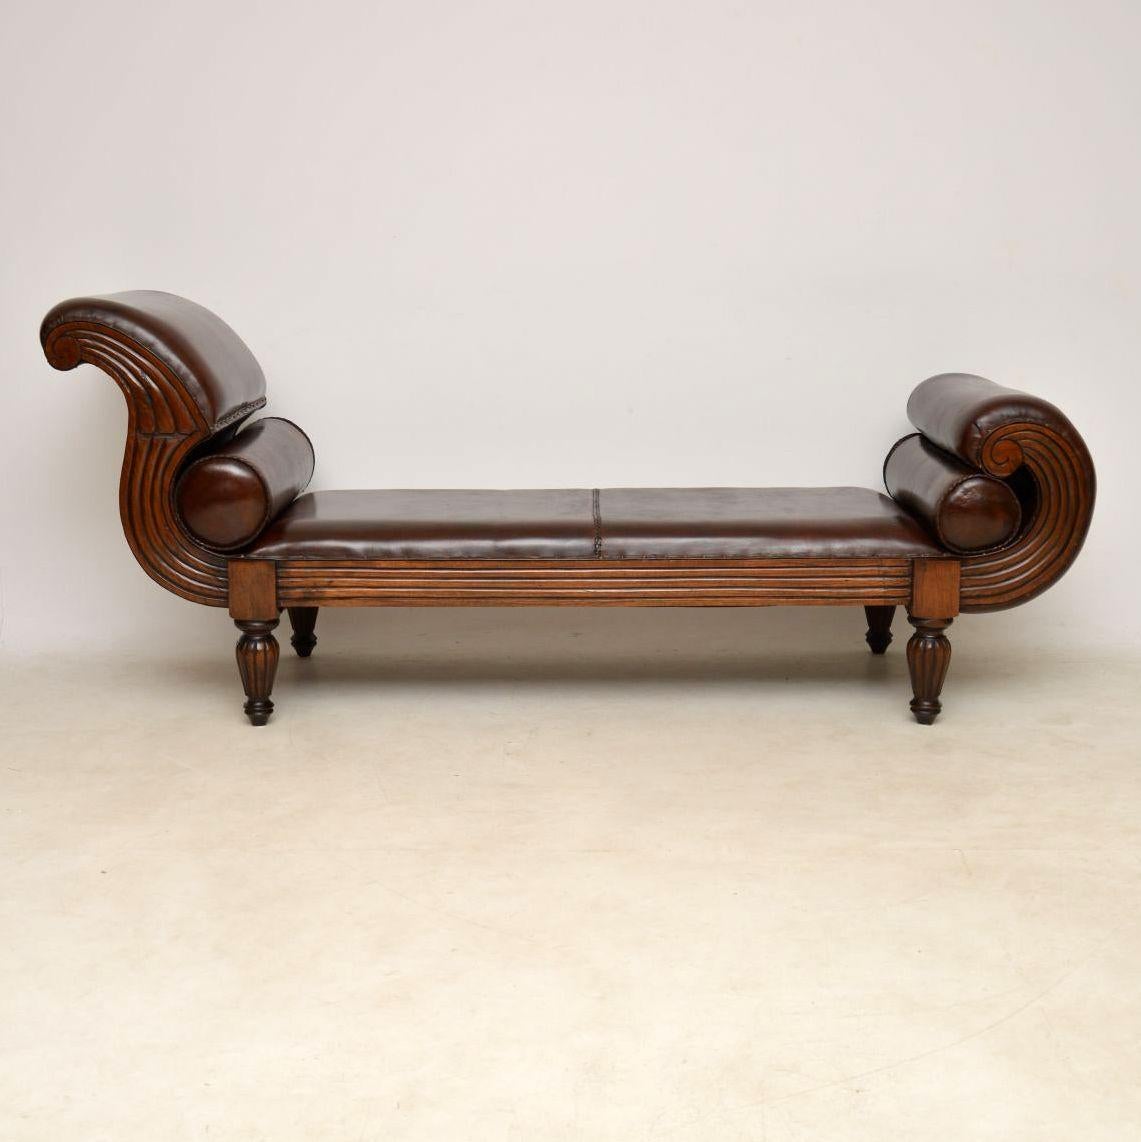 This antique Swedish leather chaise lounge is an extremely stylish and stunning looking piece. The original leather is hand stitched and hand tacked onto the frame. I don’t know if you can see the tacks clearly enough, maybe with enlargement, but